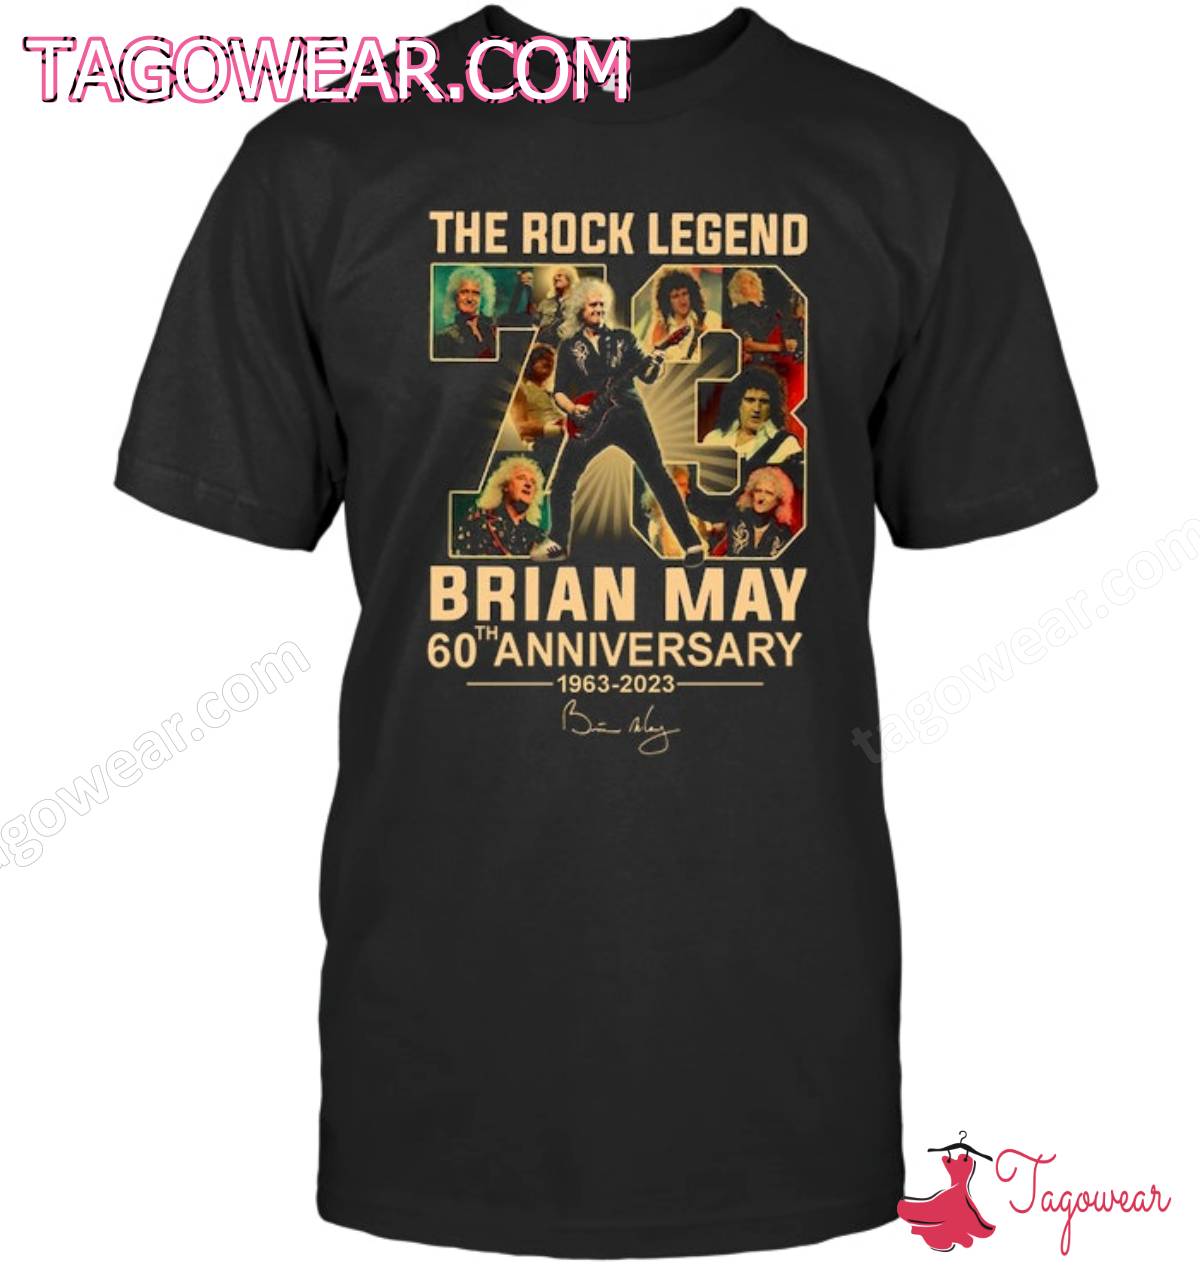 The Rock Legend Brian May 60th Anniversary 1963-2023 Signature Shirt a